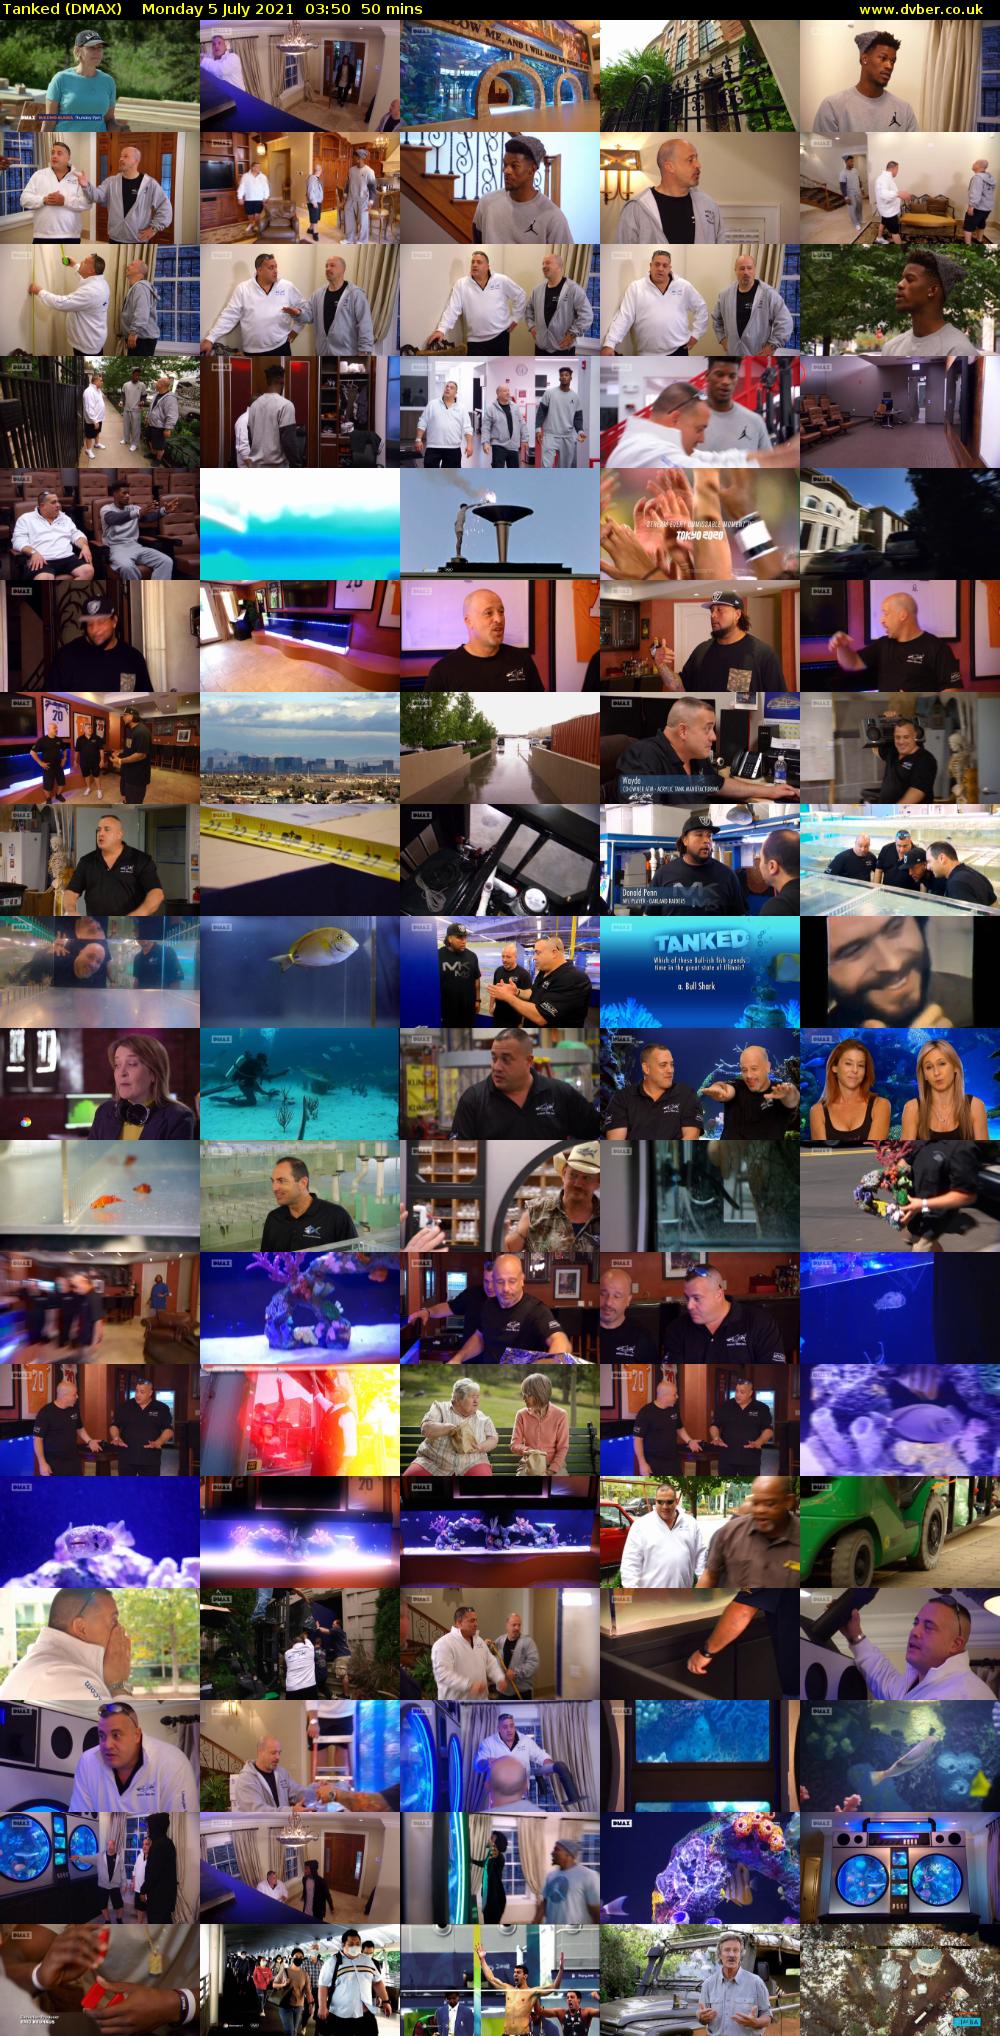 Tanked (DMAX) Monday 5 July 2021 03:50 - 04:40